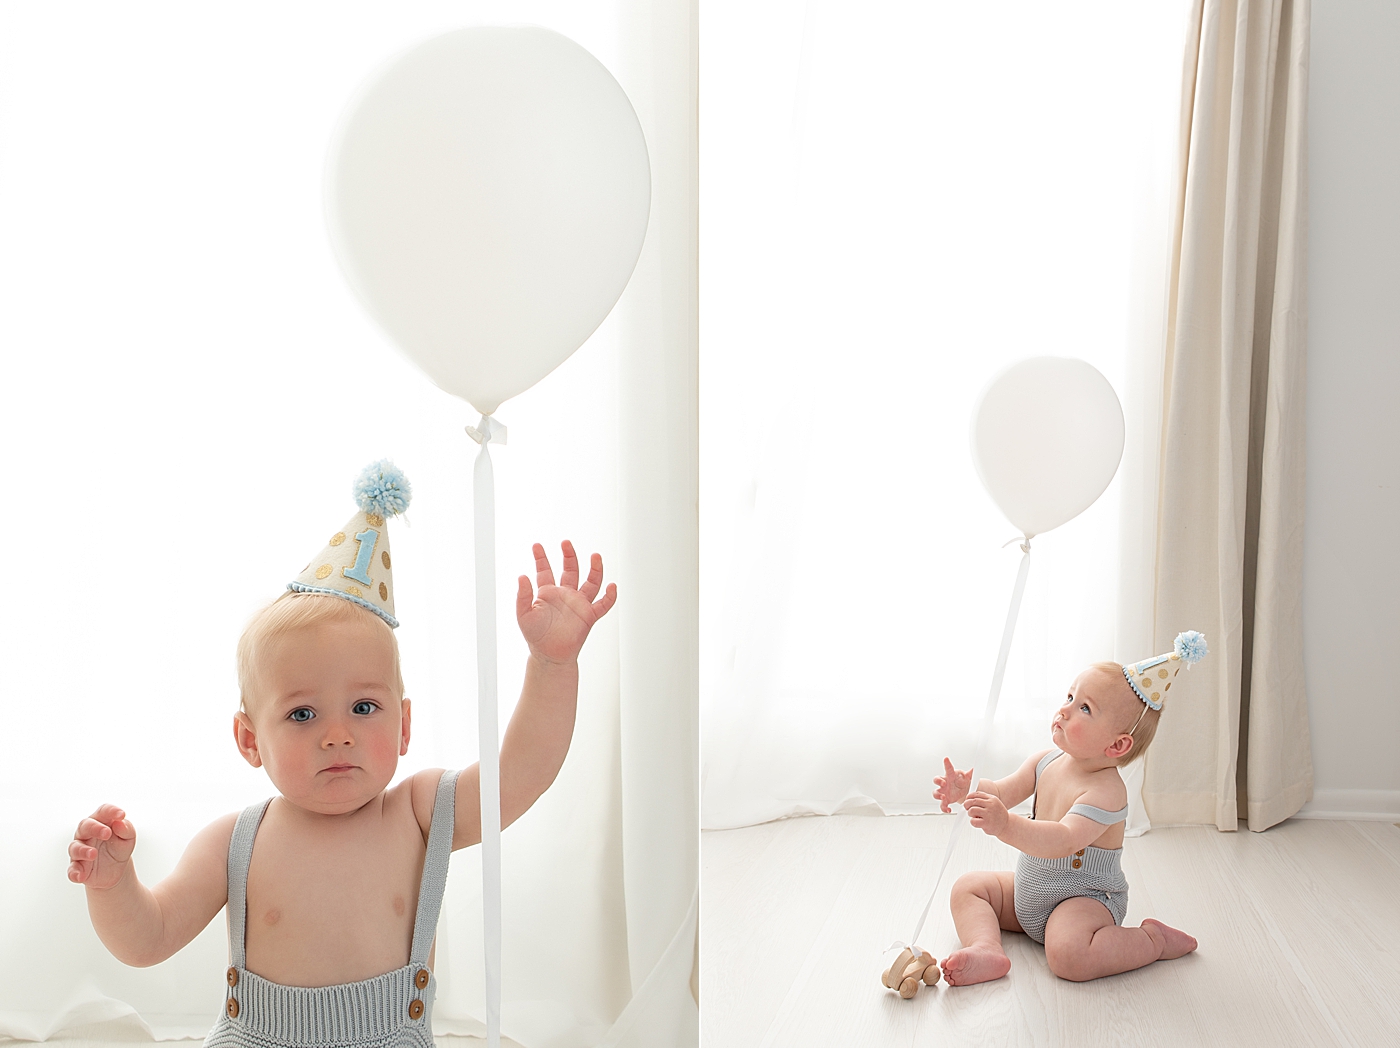 One year old photoshoot with big white balloon. Photo by Rachel Brookes Photography.